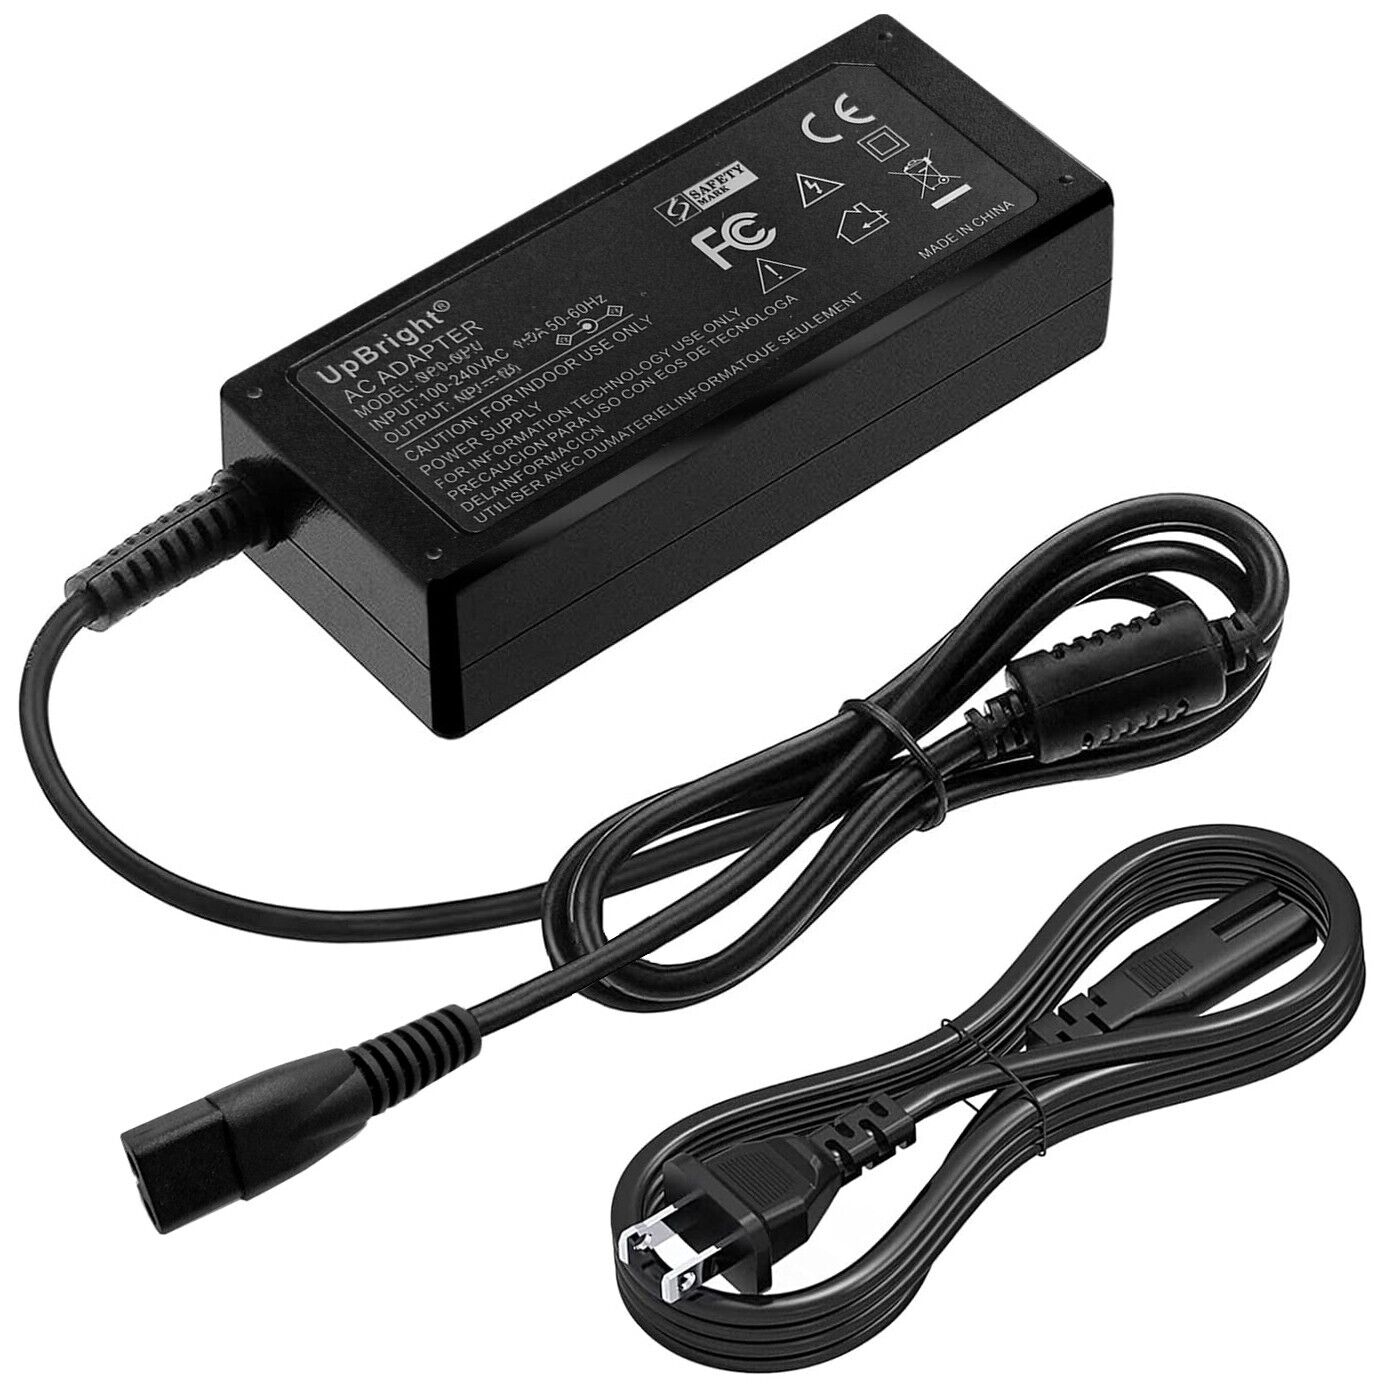 AC / DC Adapter For Wybot WY3312Max Osprey 700 Max Cordless Robotic Pool Cleaner